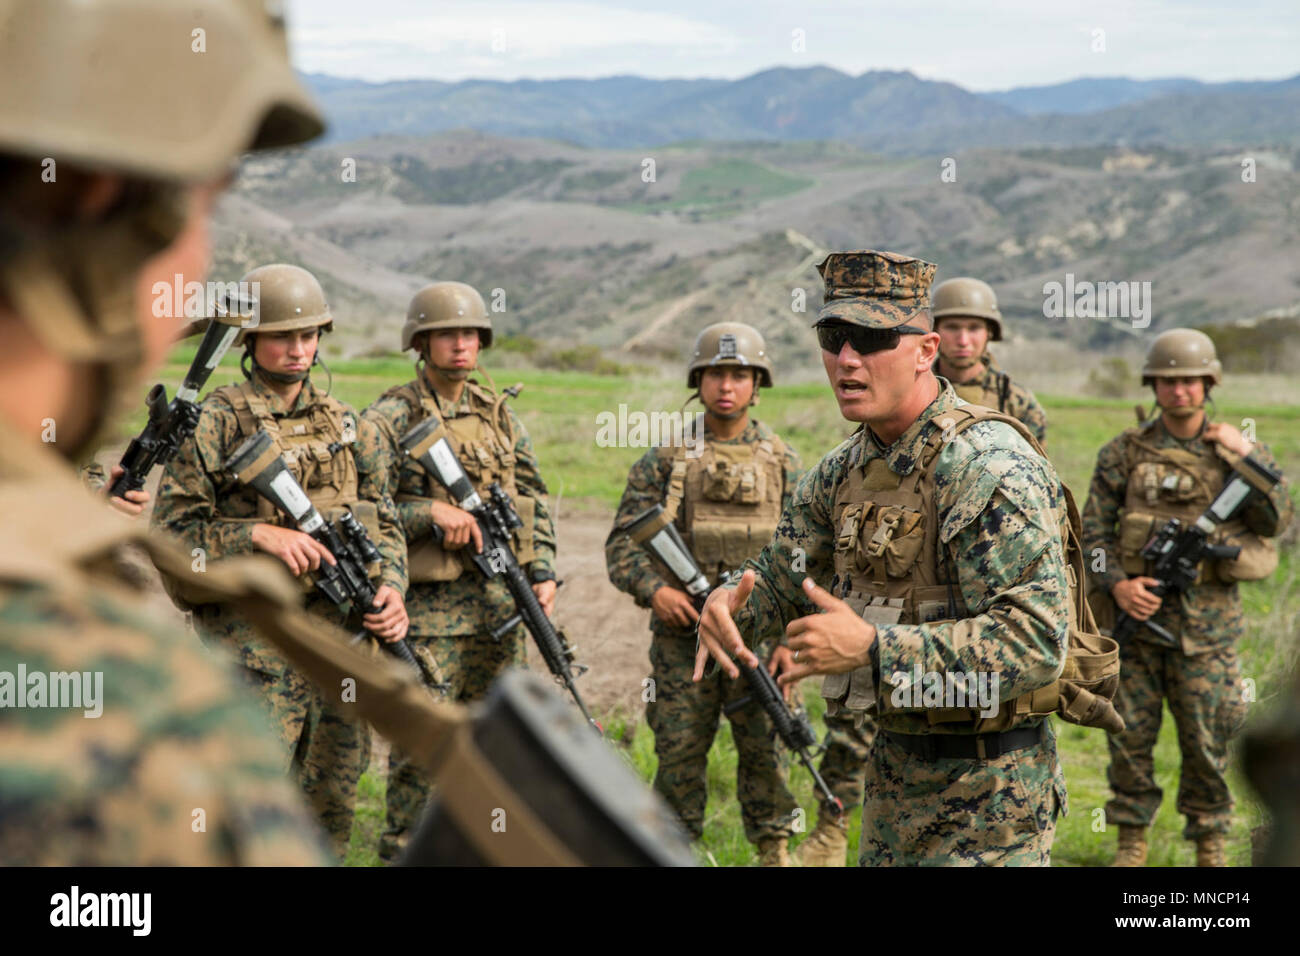 U.S. Marine Staff Sgt. James Boll, a combat instructor with Golf Company, Marine Combat Training Battalion (MCT), School of Infantry – West, instructs Marine on how to conduct patrols on Camp Pendleton, Calif., March 20, 2018. Golf Co. is the first integrated male/female MCT company on the West Coast. (U.S. Marine Corps Stock Photo